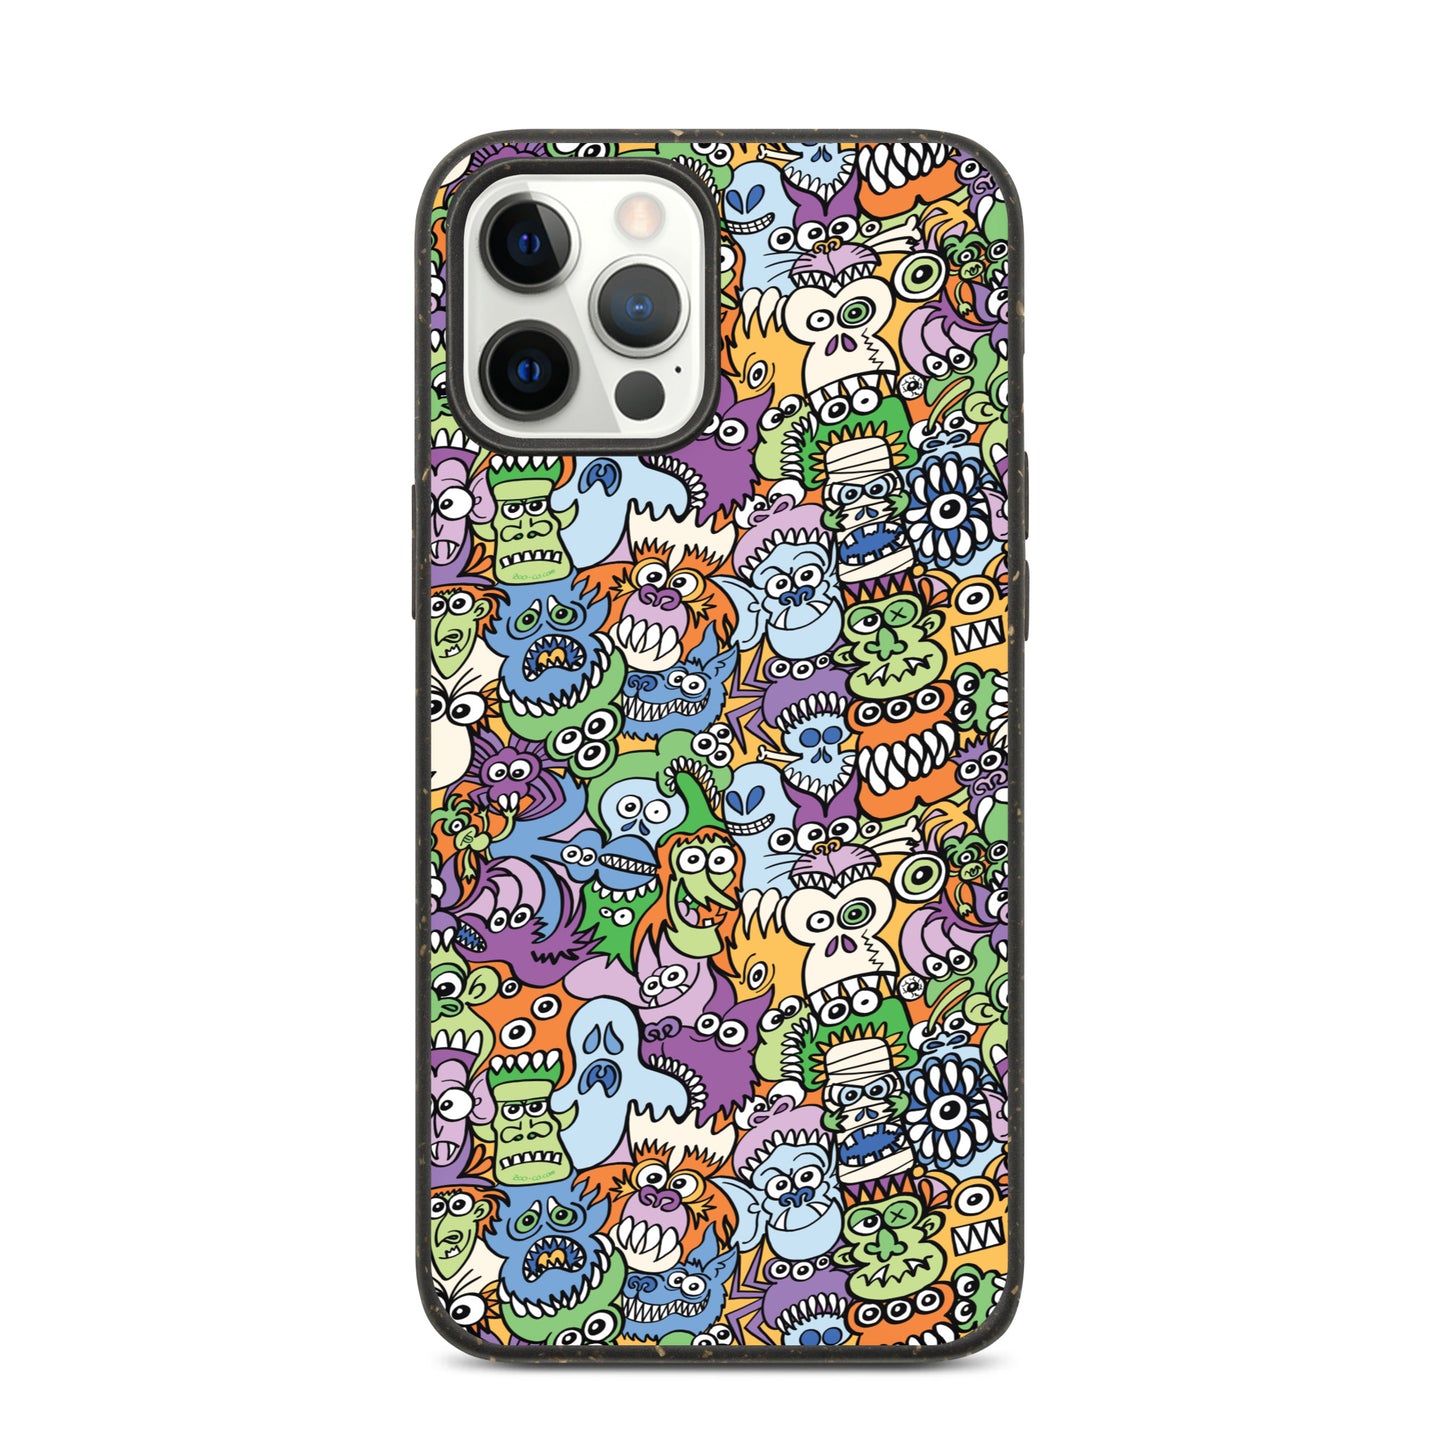 All the spooky Halloween monsters in a pattern design Speckled iPhone case. iphone 12 pro max